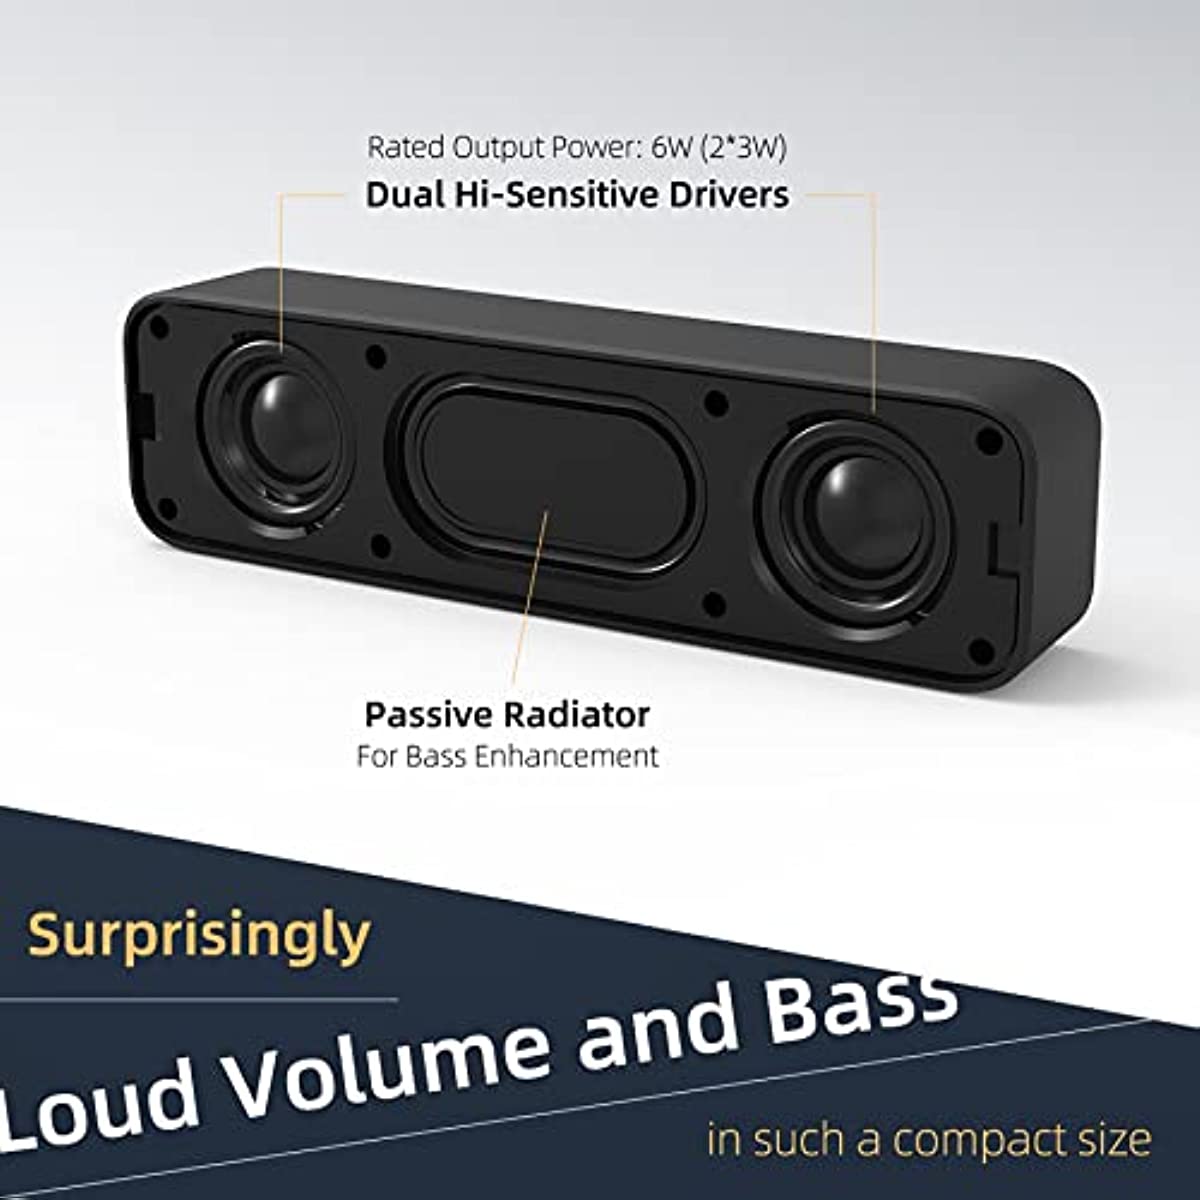 Upgrade Your Computer/Laptop Audio with this Portable Mini Sound Bar - Stereo Sound & Enhanced Bass for Windows PCs & Laptops!